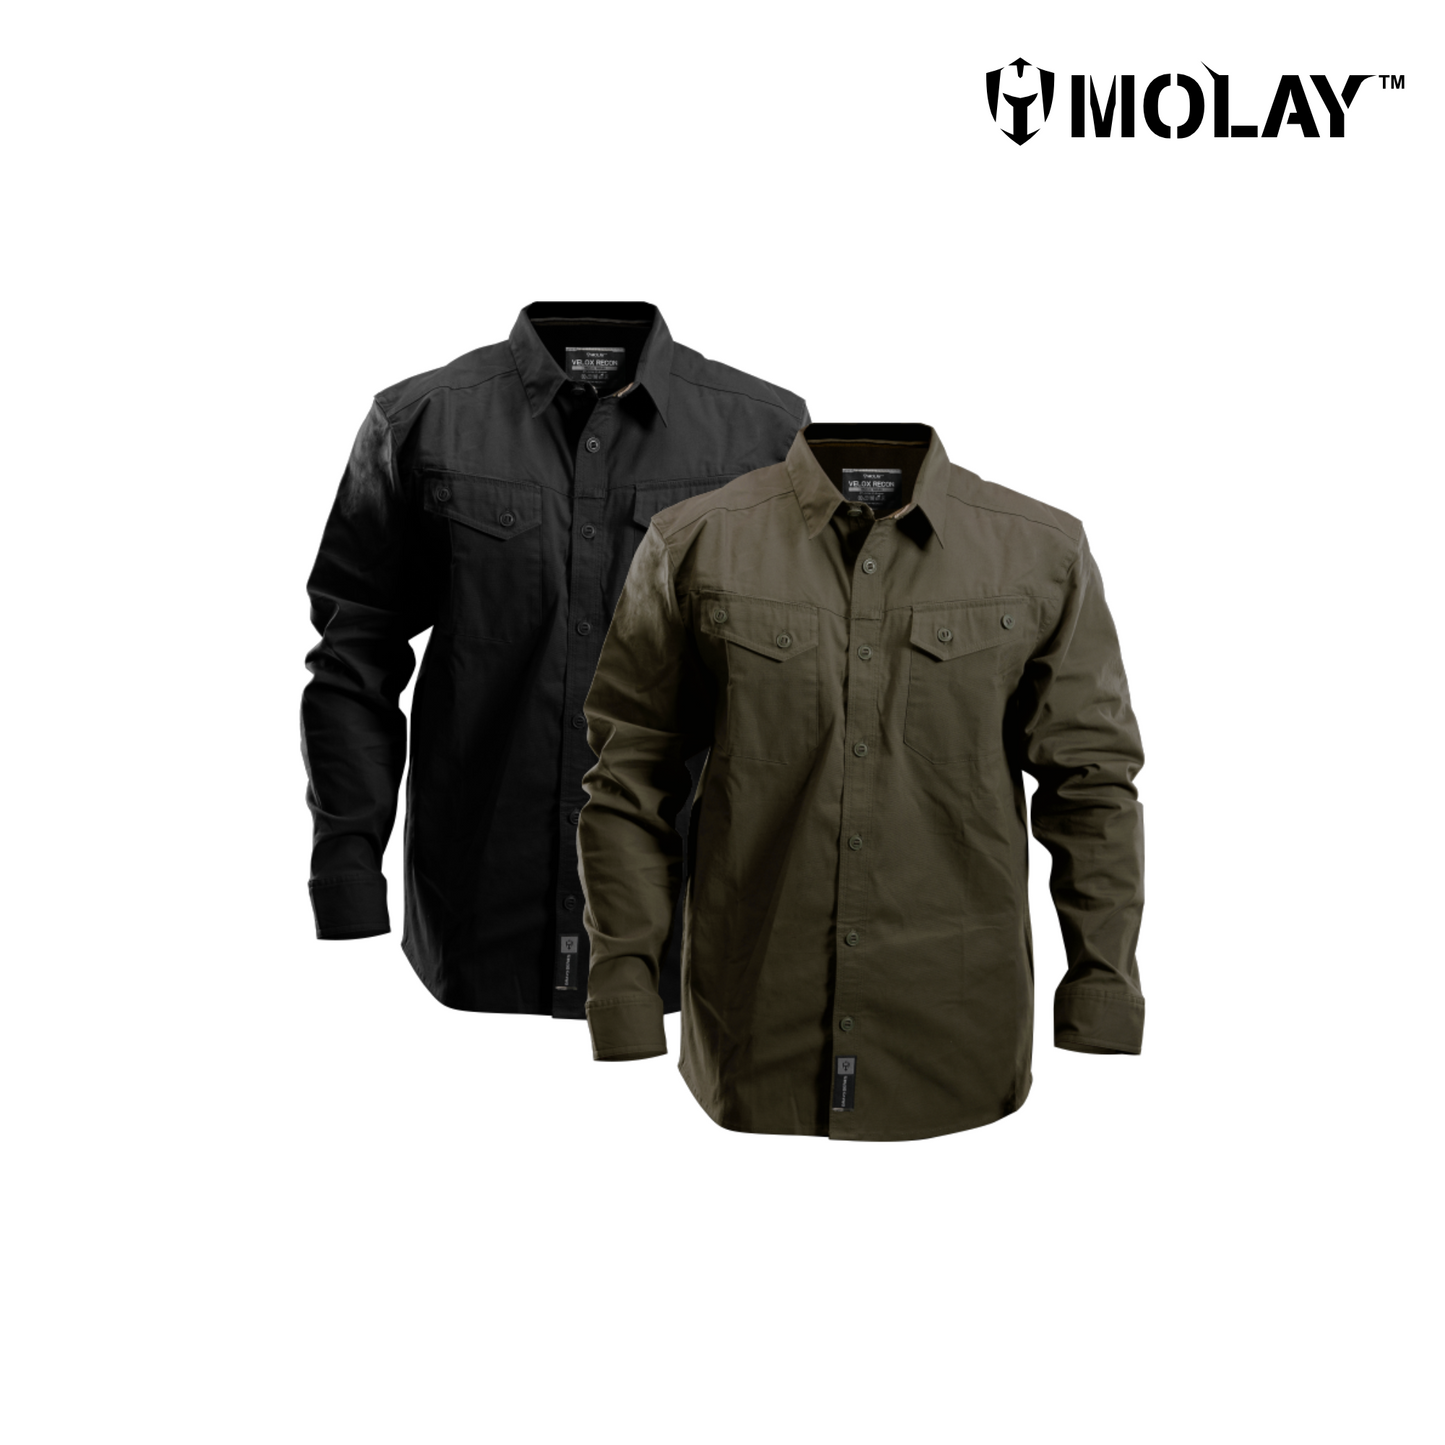 Molay™️ Velox Recon Shirt Twill Polyester Edition - Long Sleeve